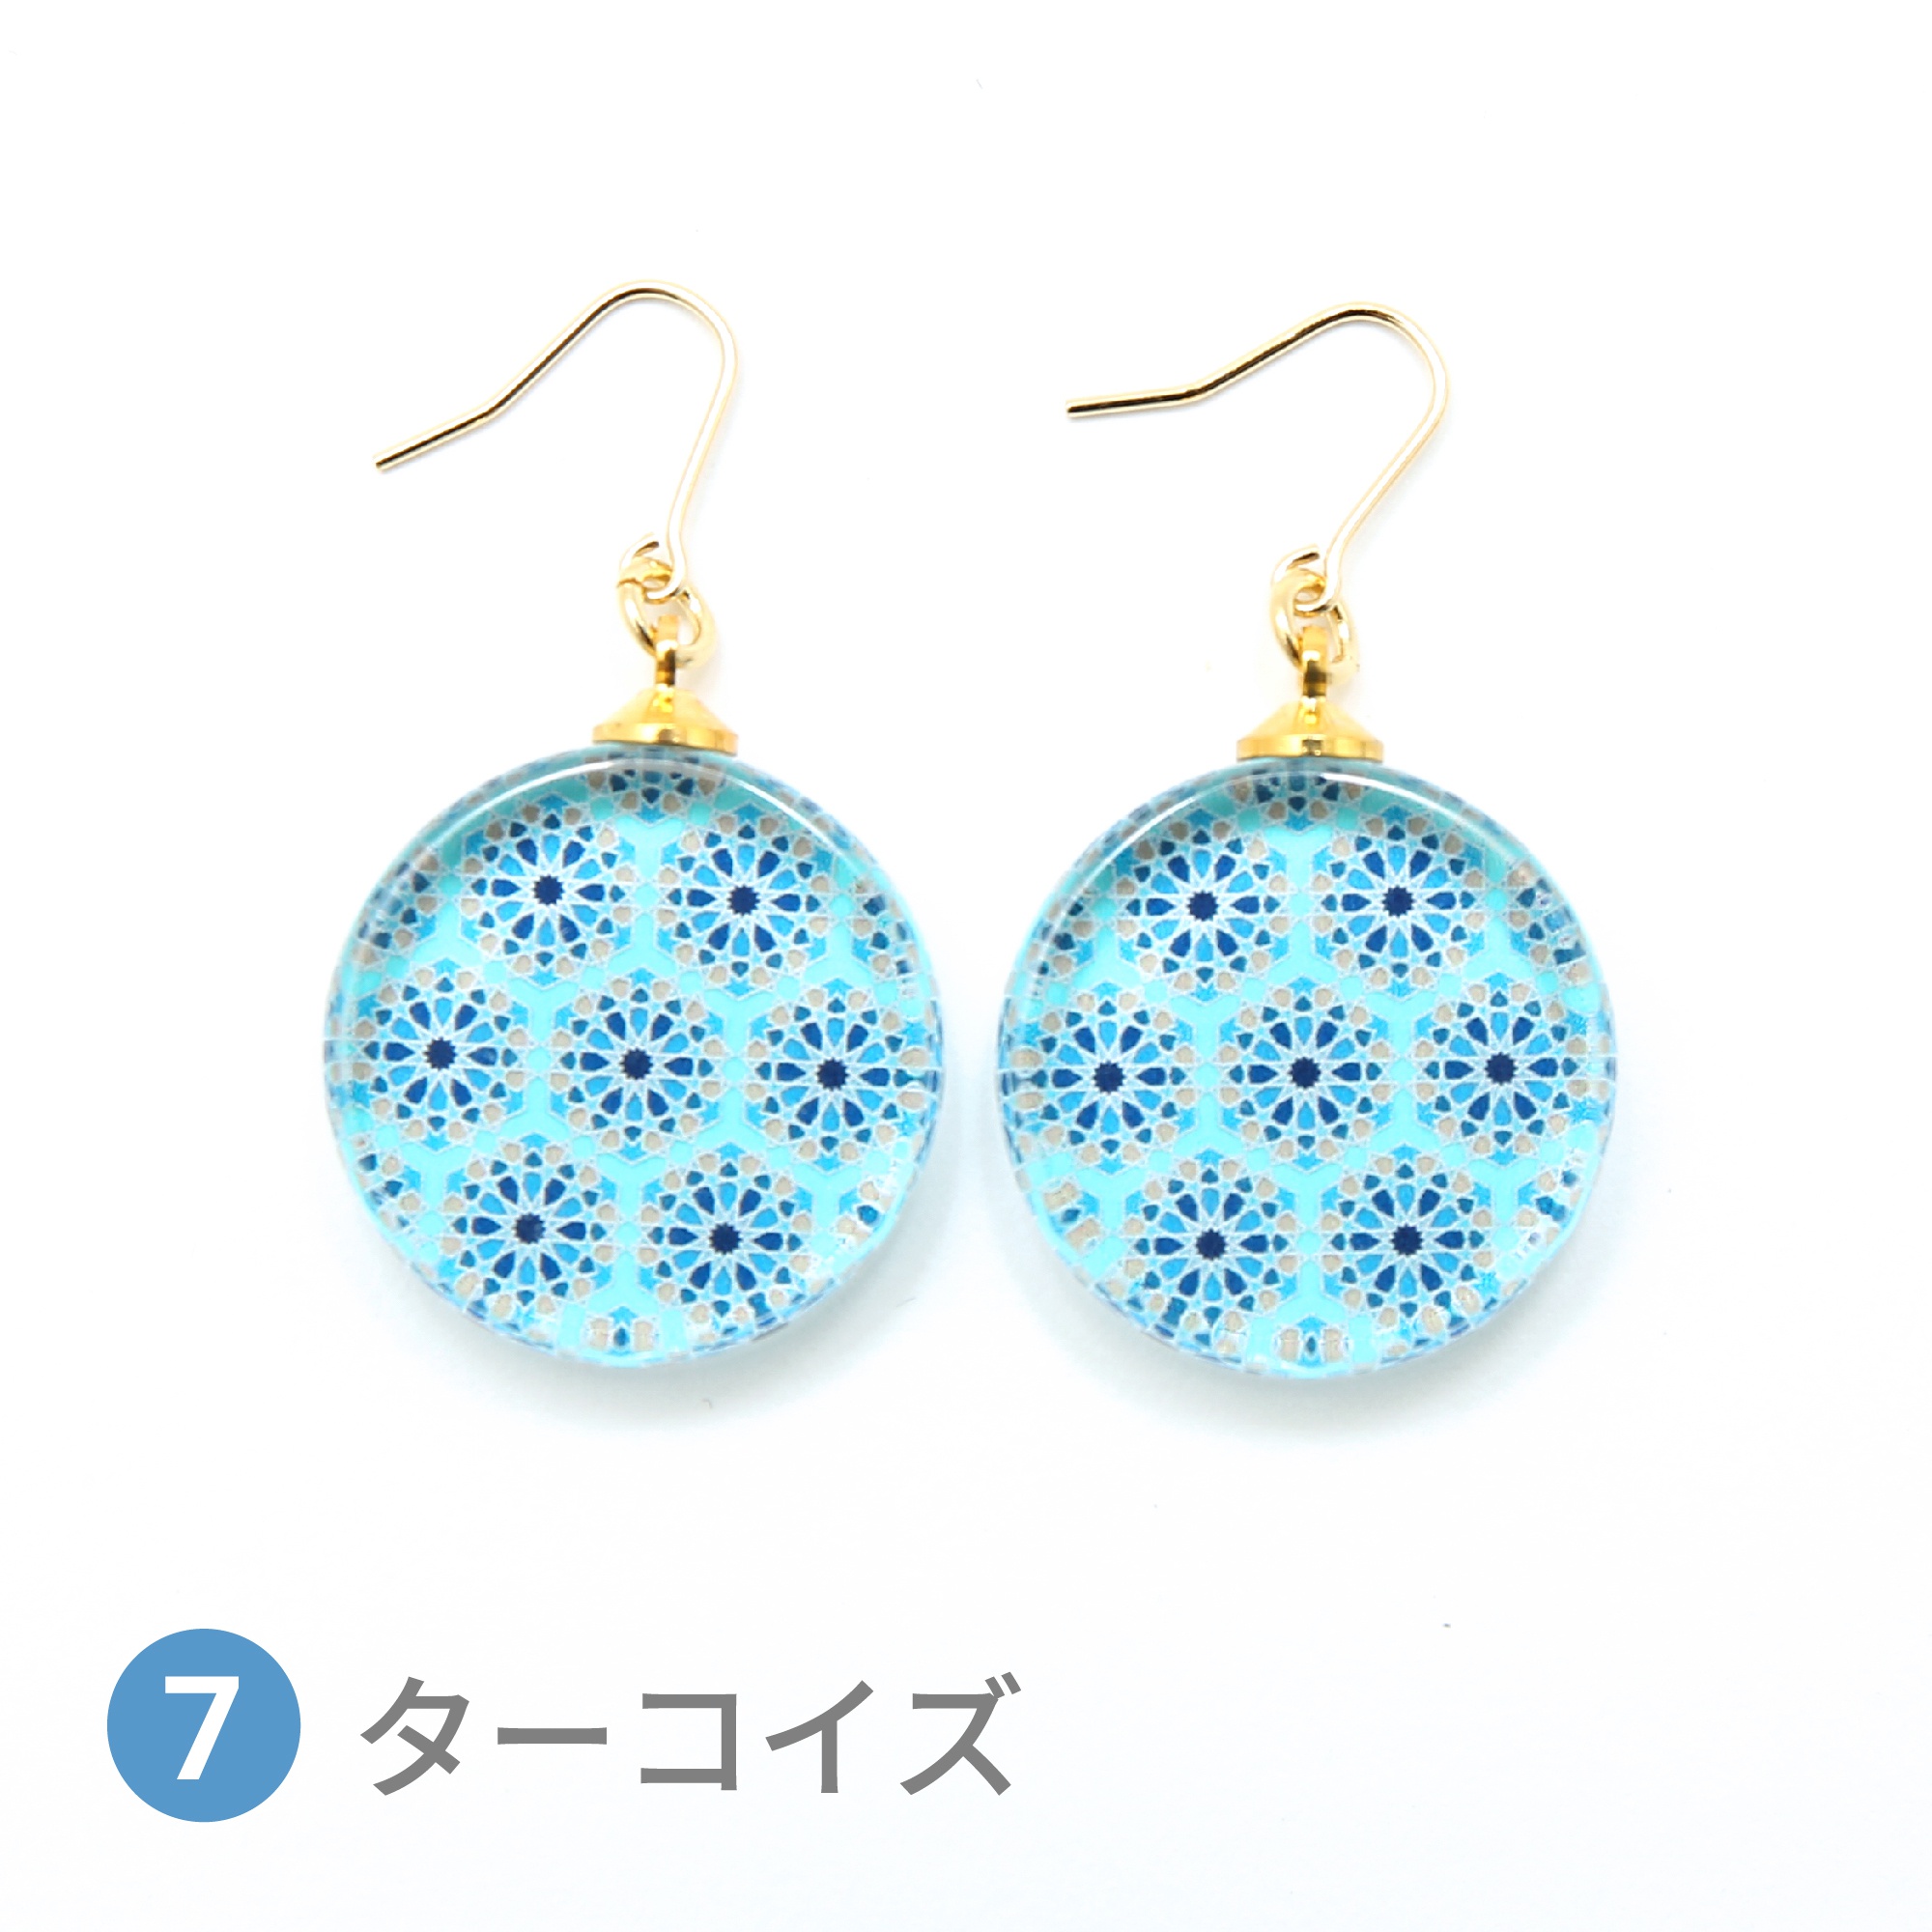 Glass accessories Pierced Earring ARABESQUE turquoise round shape